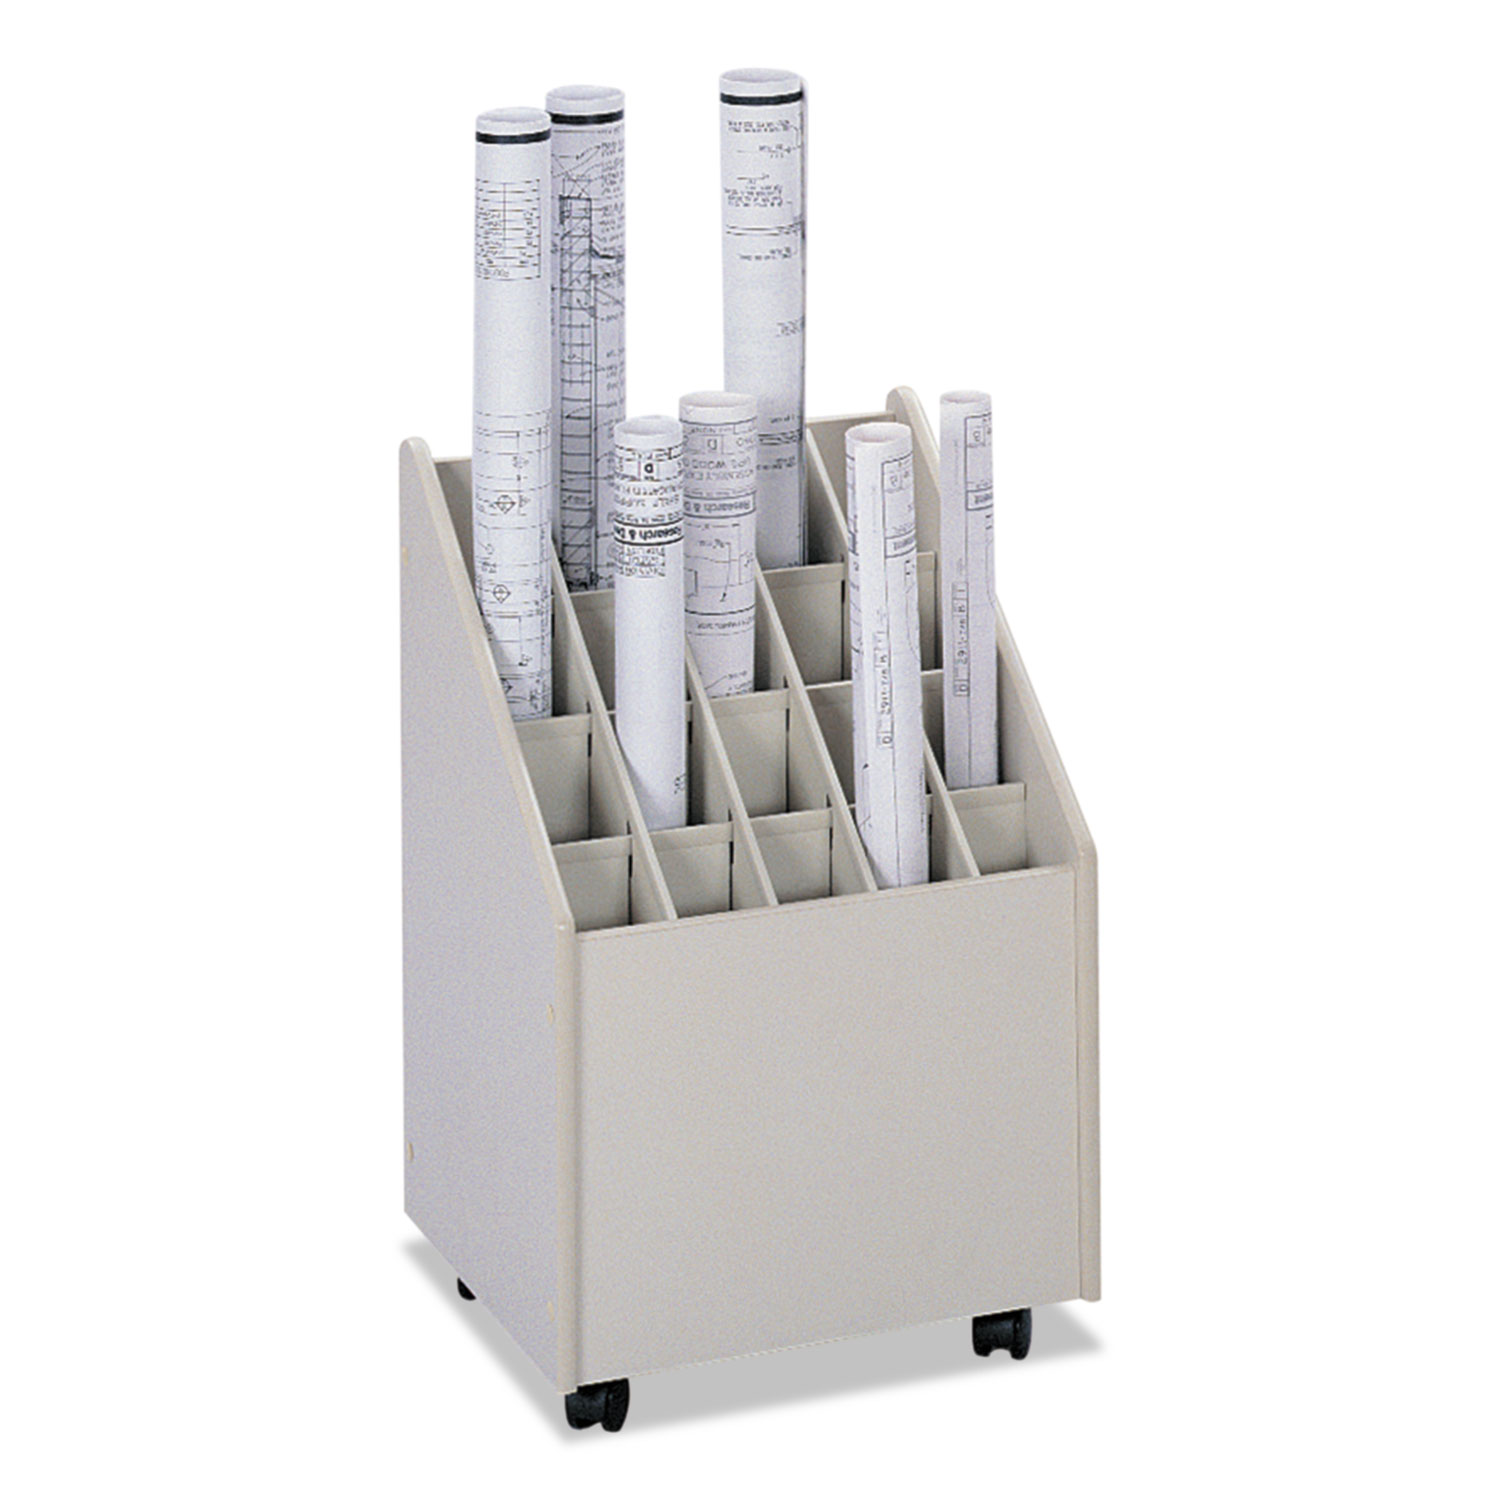  Safco 3082 Laminate Mobile Roll Files, 20 Compartments, 15.25w x 13.25d x 23.25h, Putty (SAF3082) 